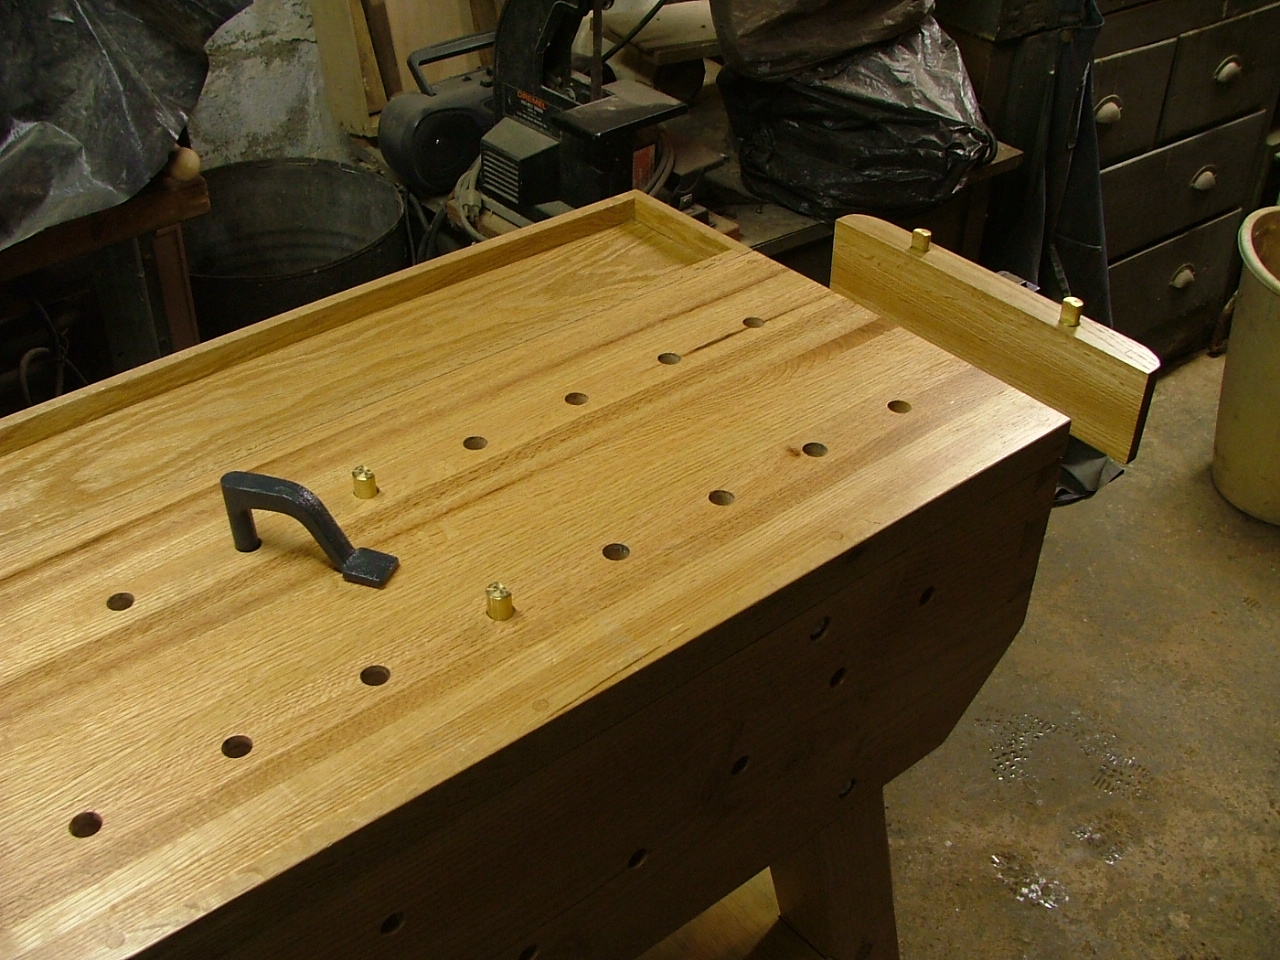 Woodworking workbench dog holes